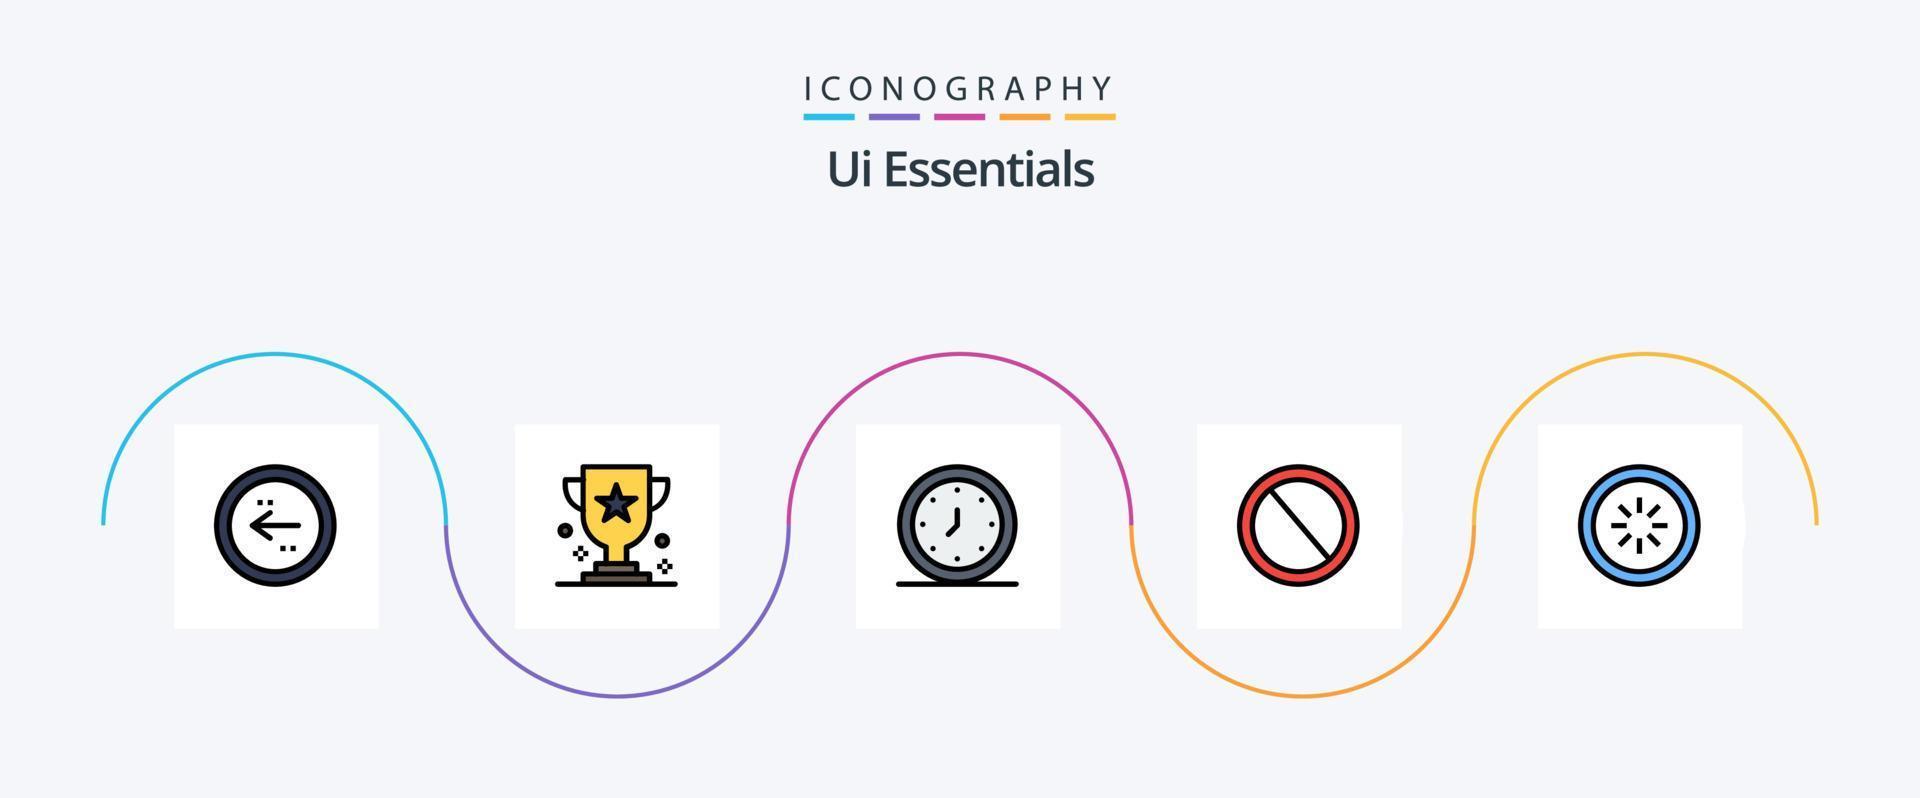 Ui Essentials Line Filled Flat 5 Icon Pack Including garbage. bin. prize. timer. clock vector